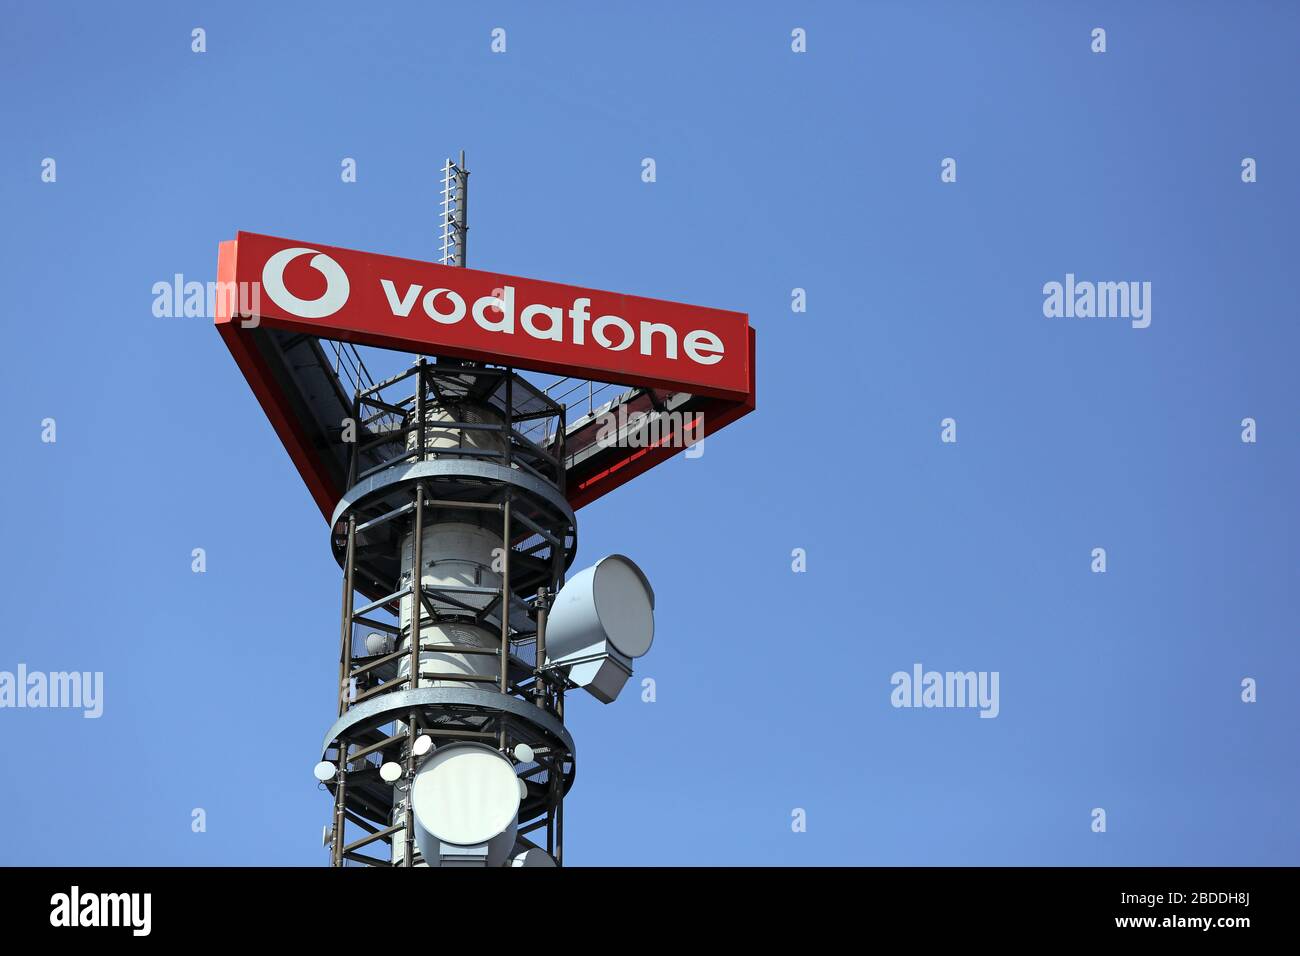 28.03.2020, Berlin, Berlin, Germany - Transmission mast of the mobile phone company vodafone. 00S200328D435CAROEX.JPG [MODEL RELEASE: NOT APPLICABLE, Stock Photo